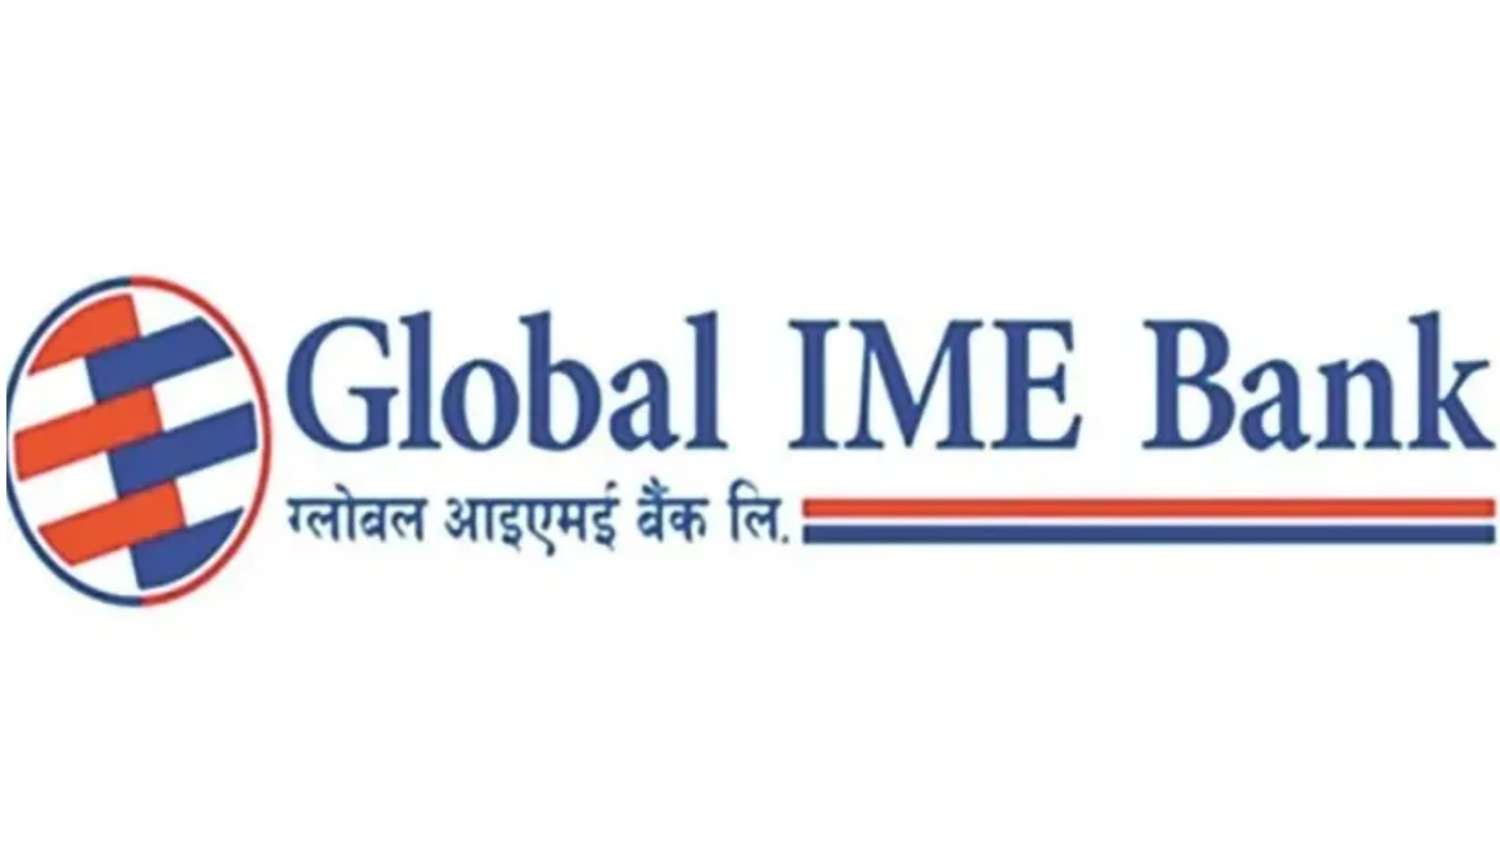 Global IME Bank Launches Branchless Service in Pancthar